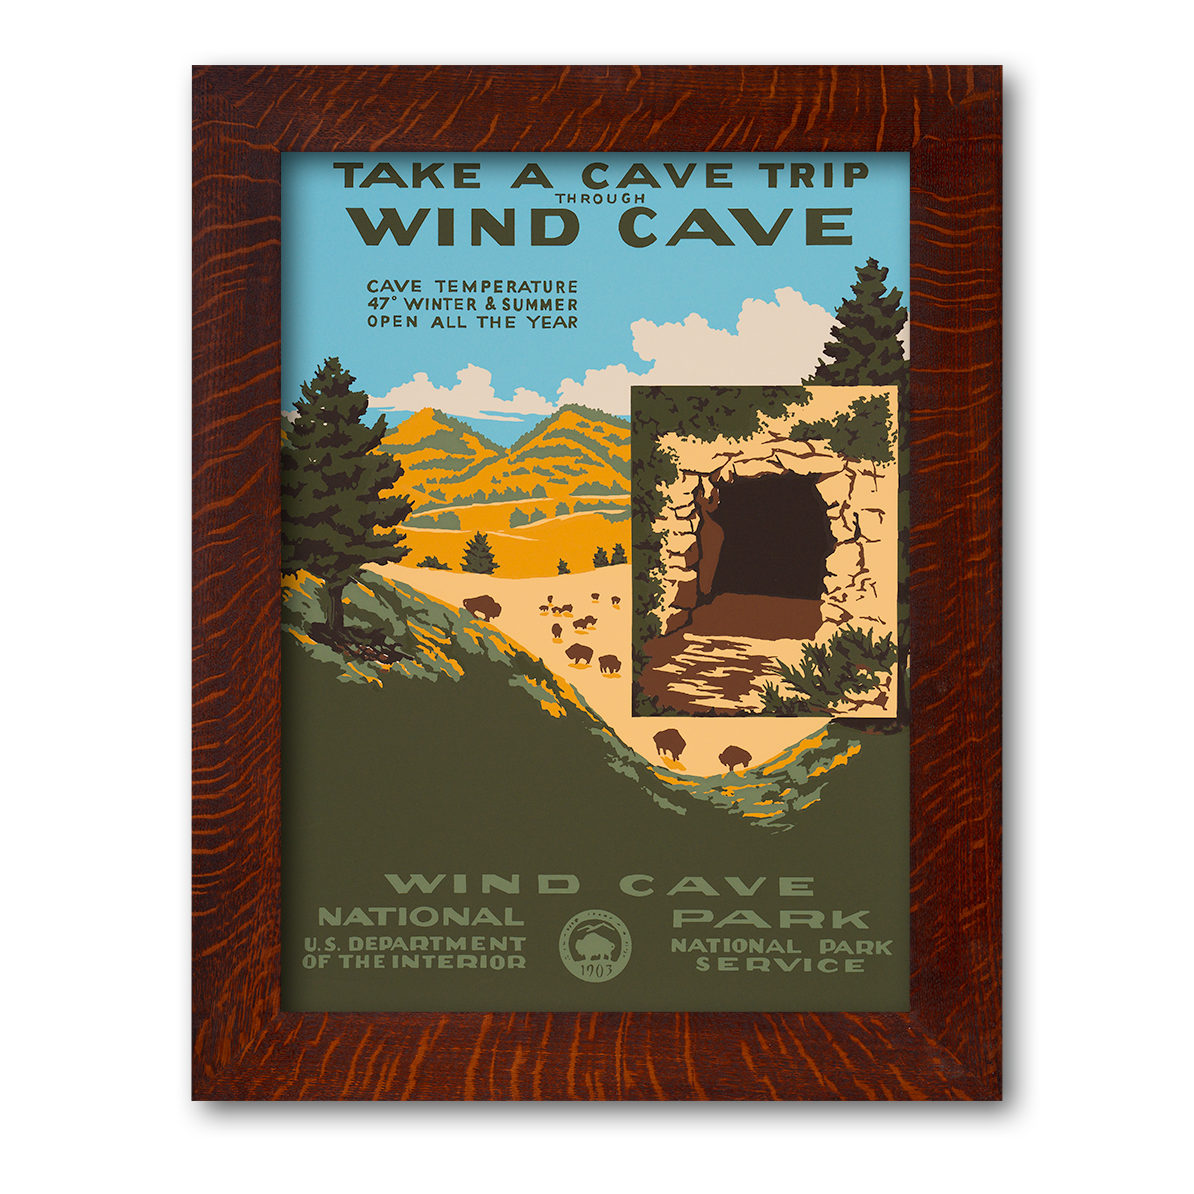 https://www.dardhunter.com/shop/images/WIND-CAVE-NATIONAL-PARK-Reproduction-WPA-Poster897-3253.png